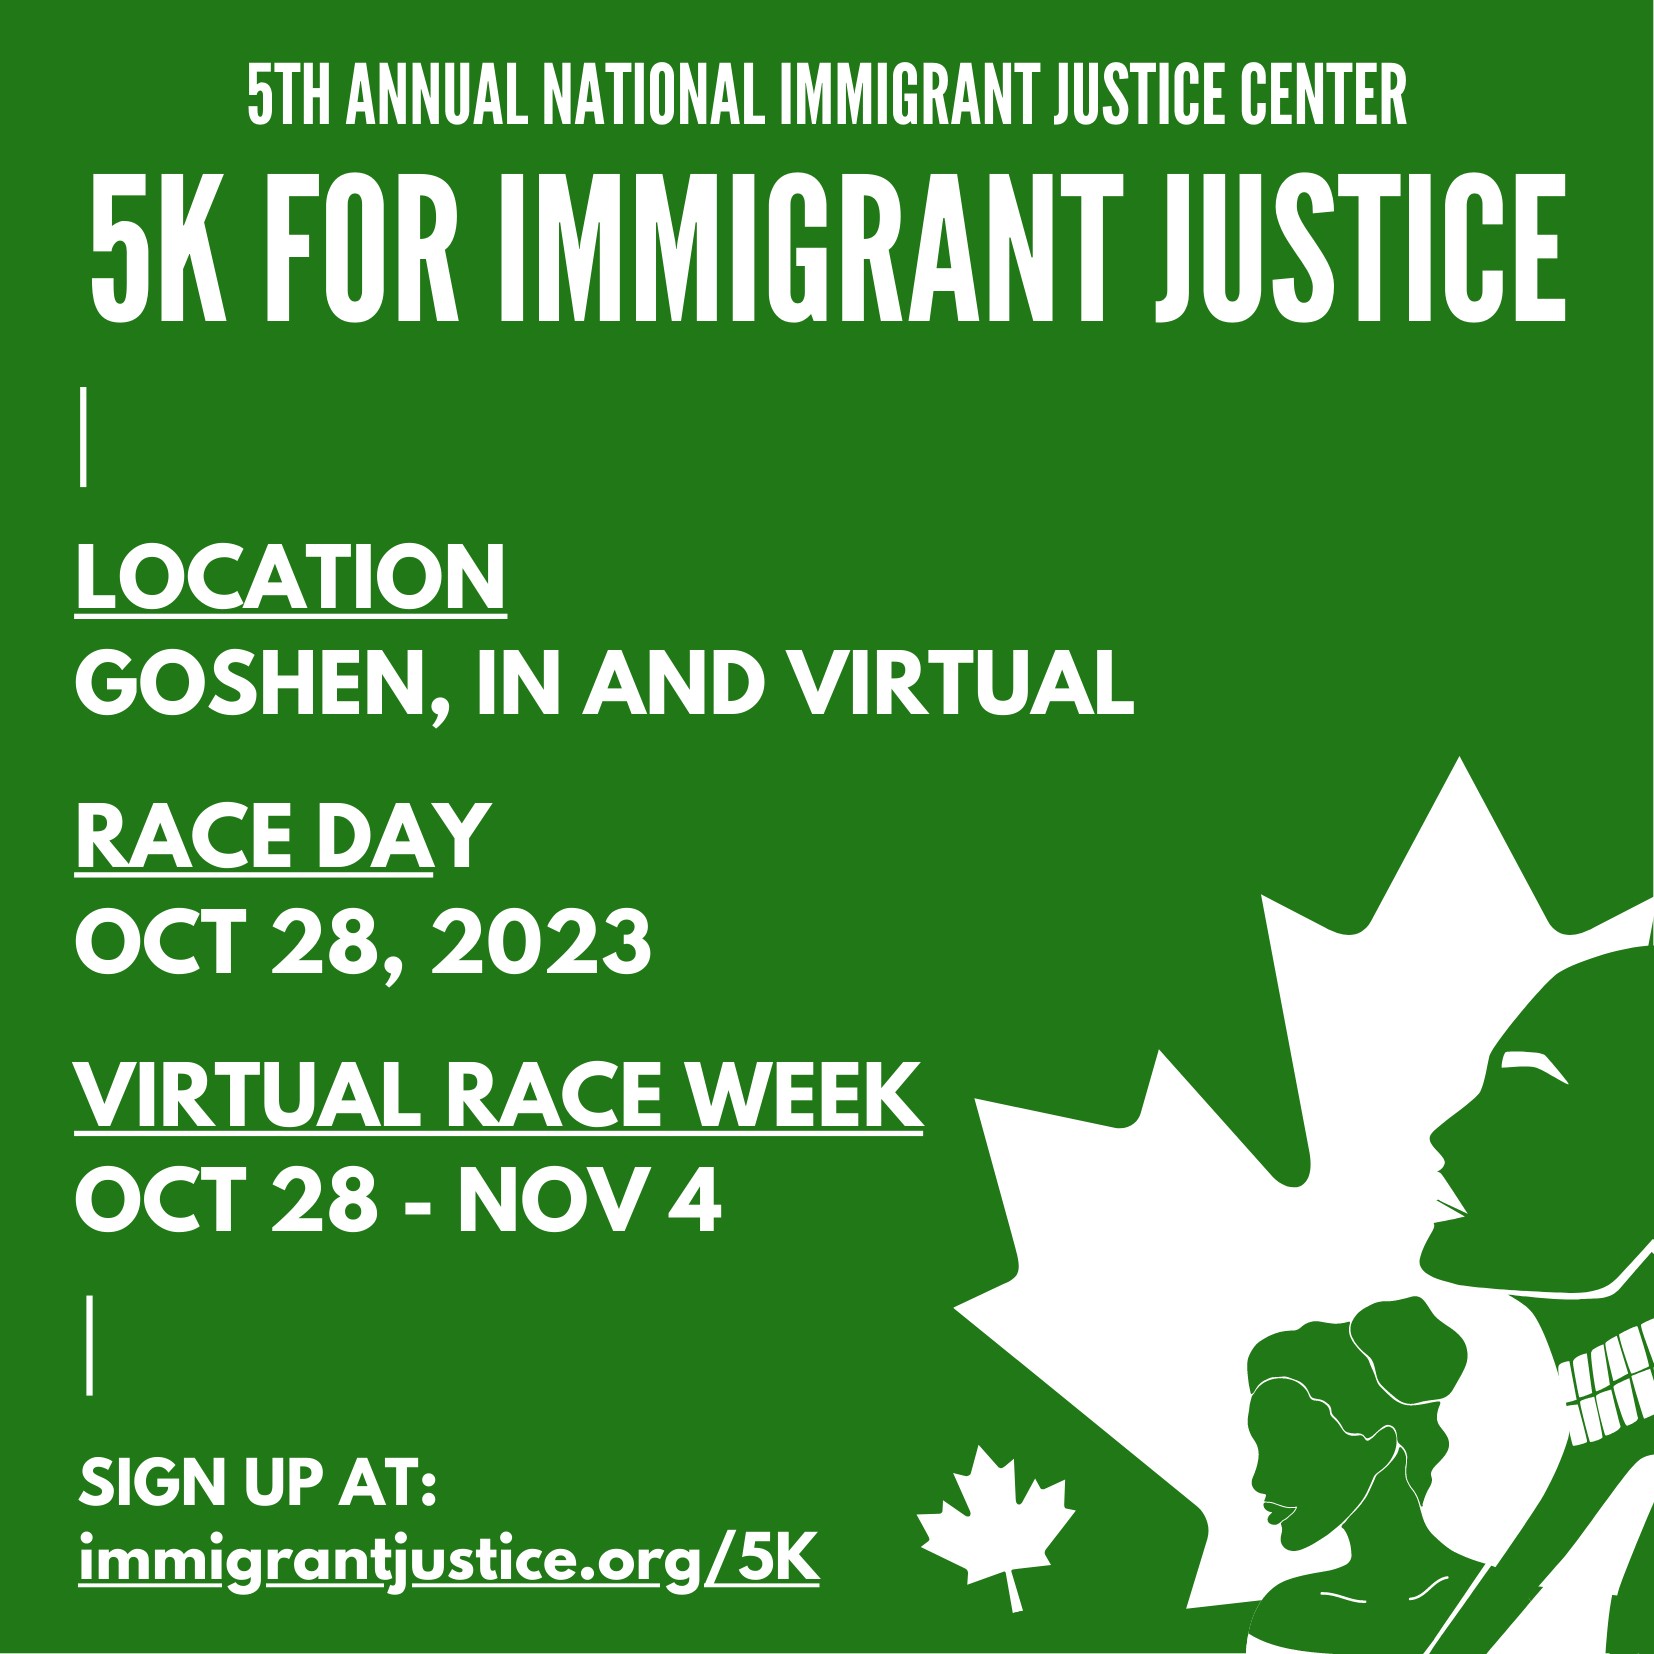 5th Annual NIJC 5K for Immigrant Justice. In person in Goshen, Indiana and virtual. Race day: October 28, 2023. Virtual race week October 28-November 4.